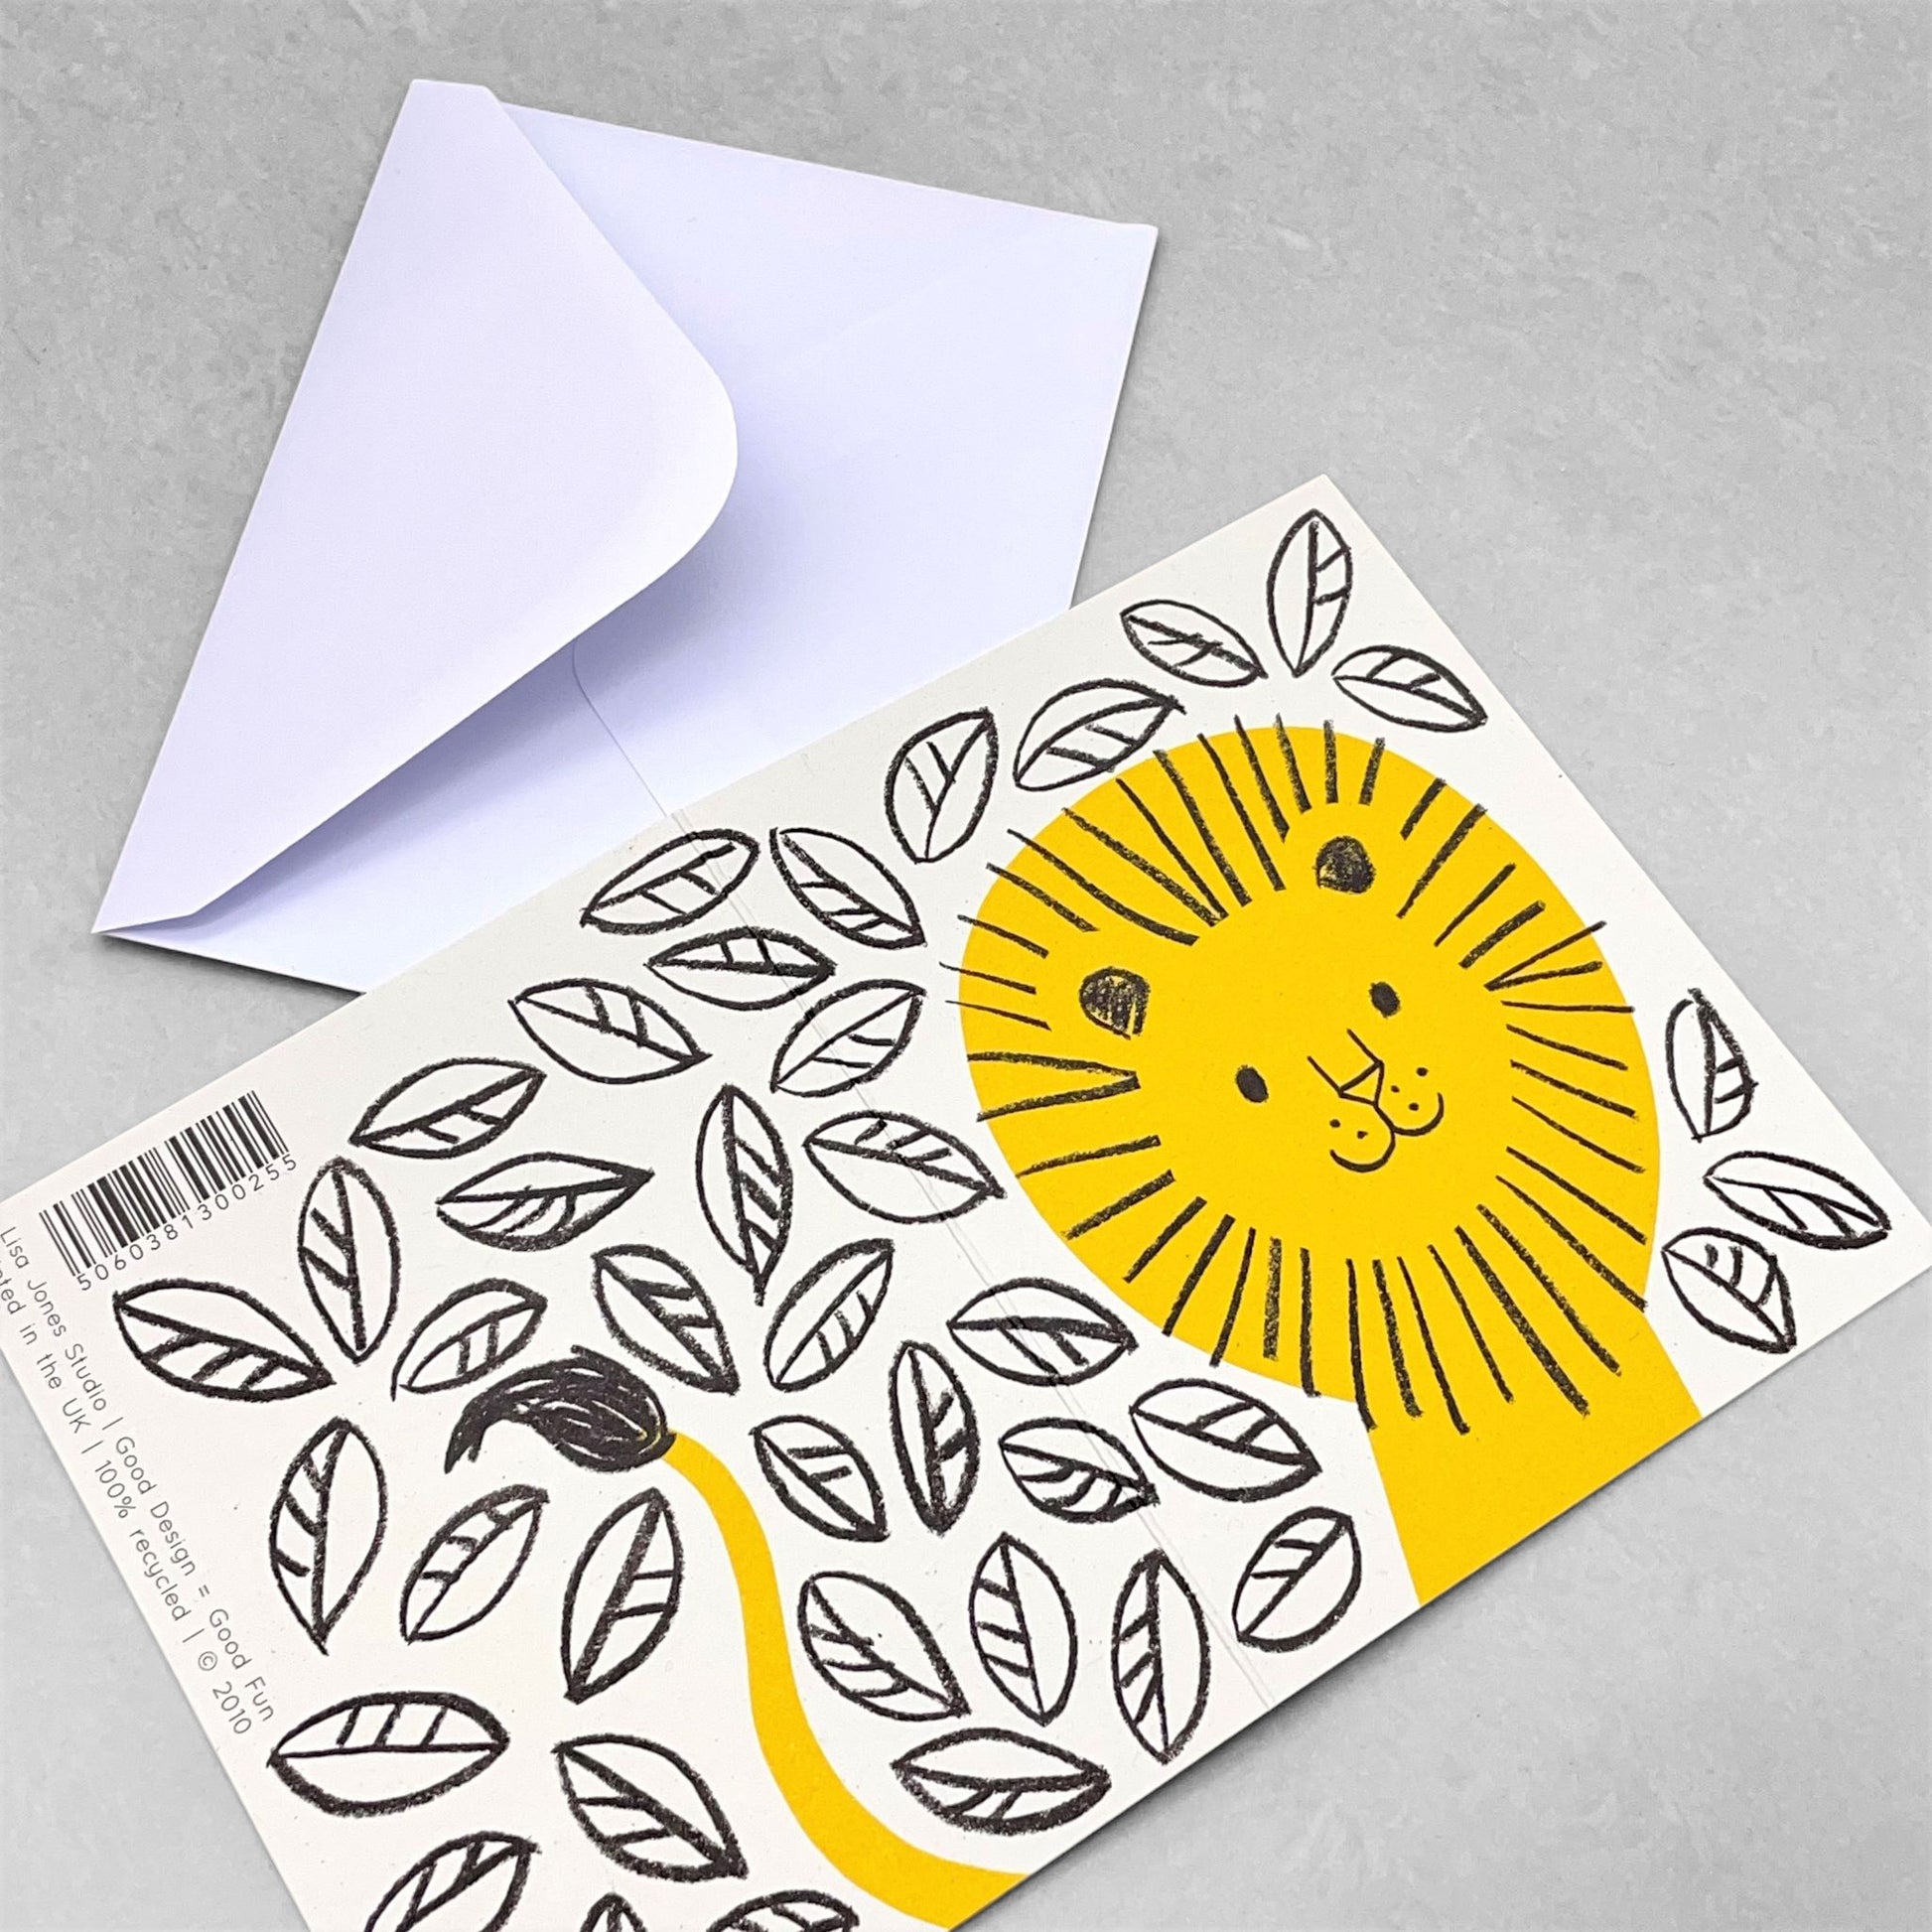 Small greeting card with a drawing of a yellow lion surrounded by black sketched leaves on a white backdrop by Lisa Jones Studio